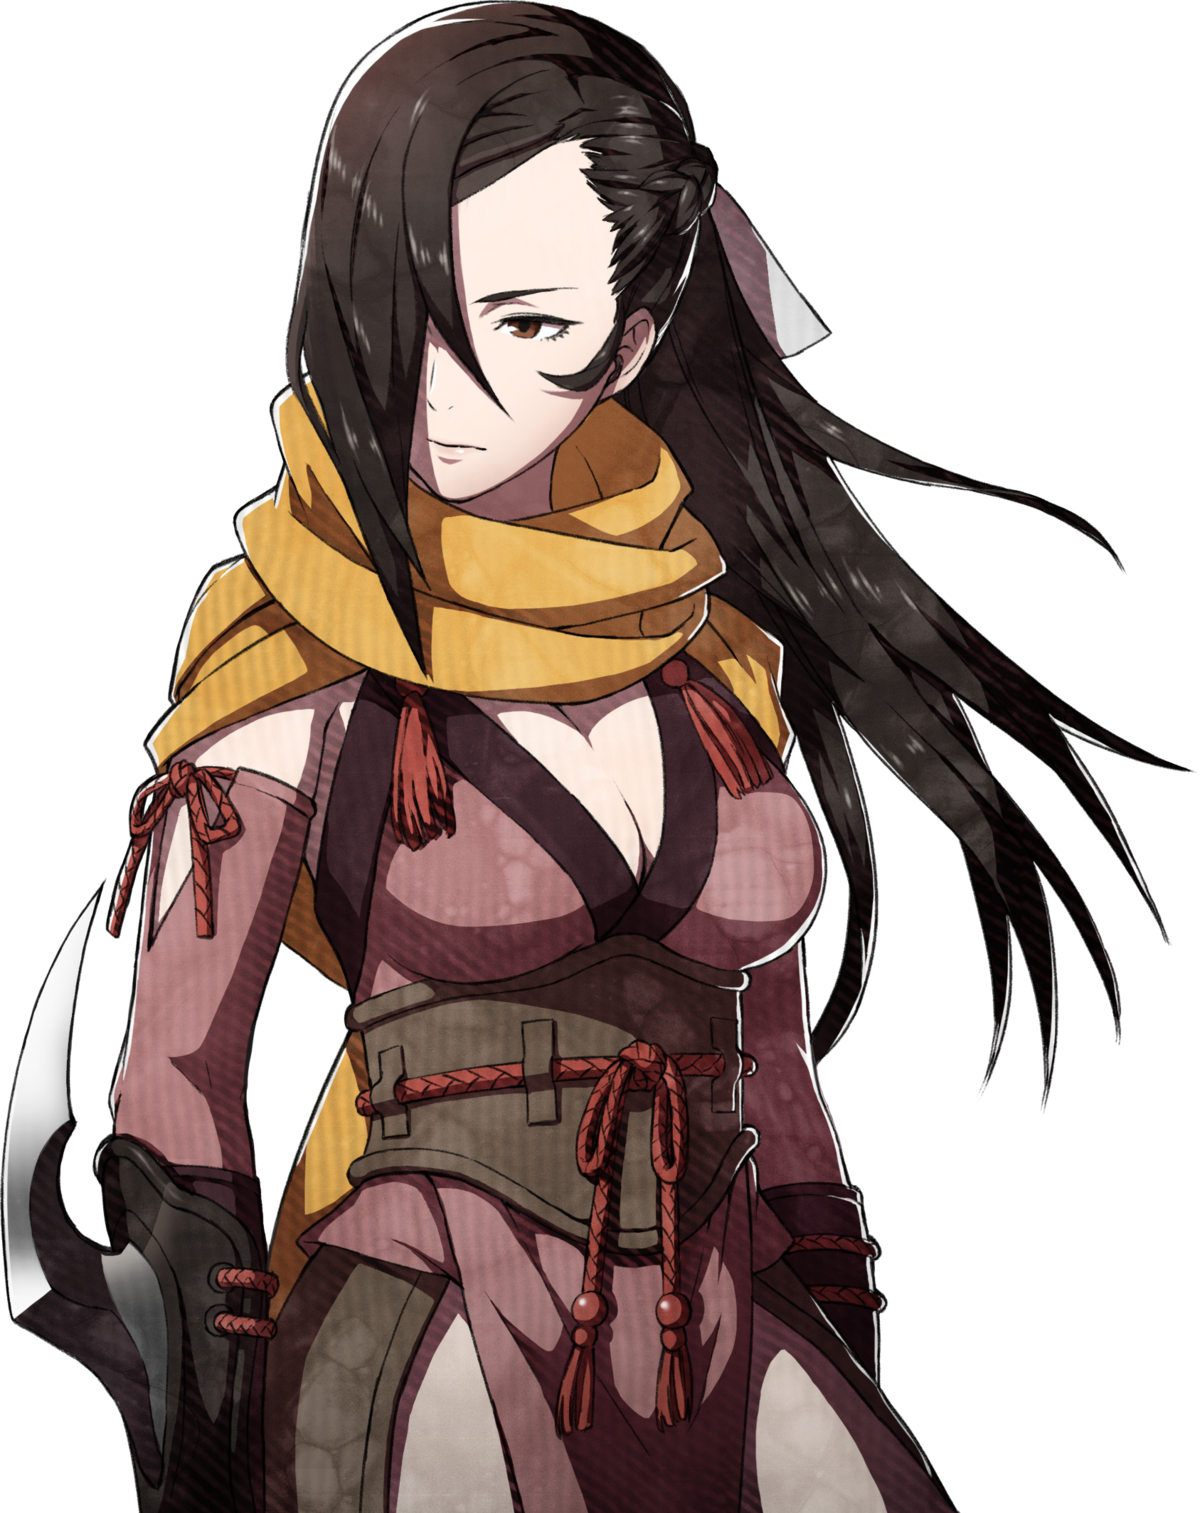 1200px-FEF_Kagero.png